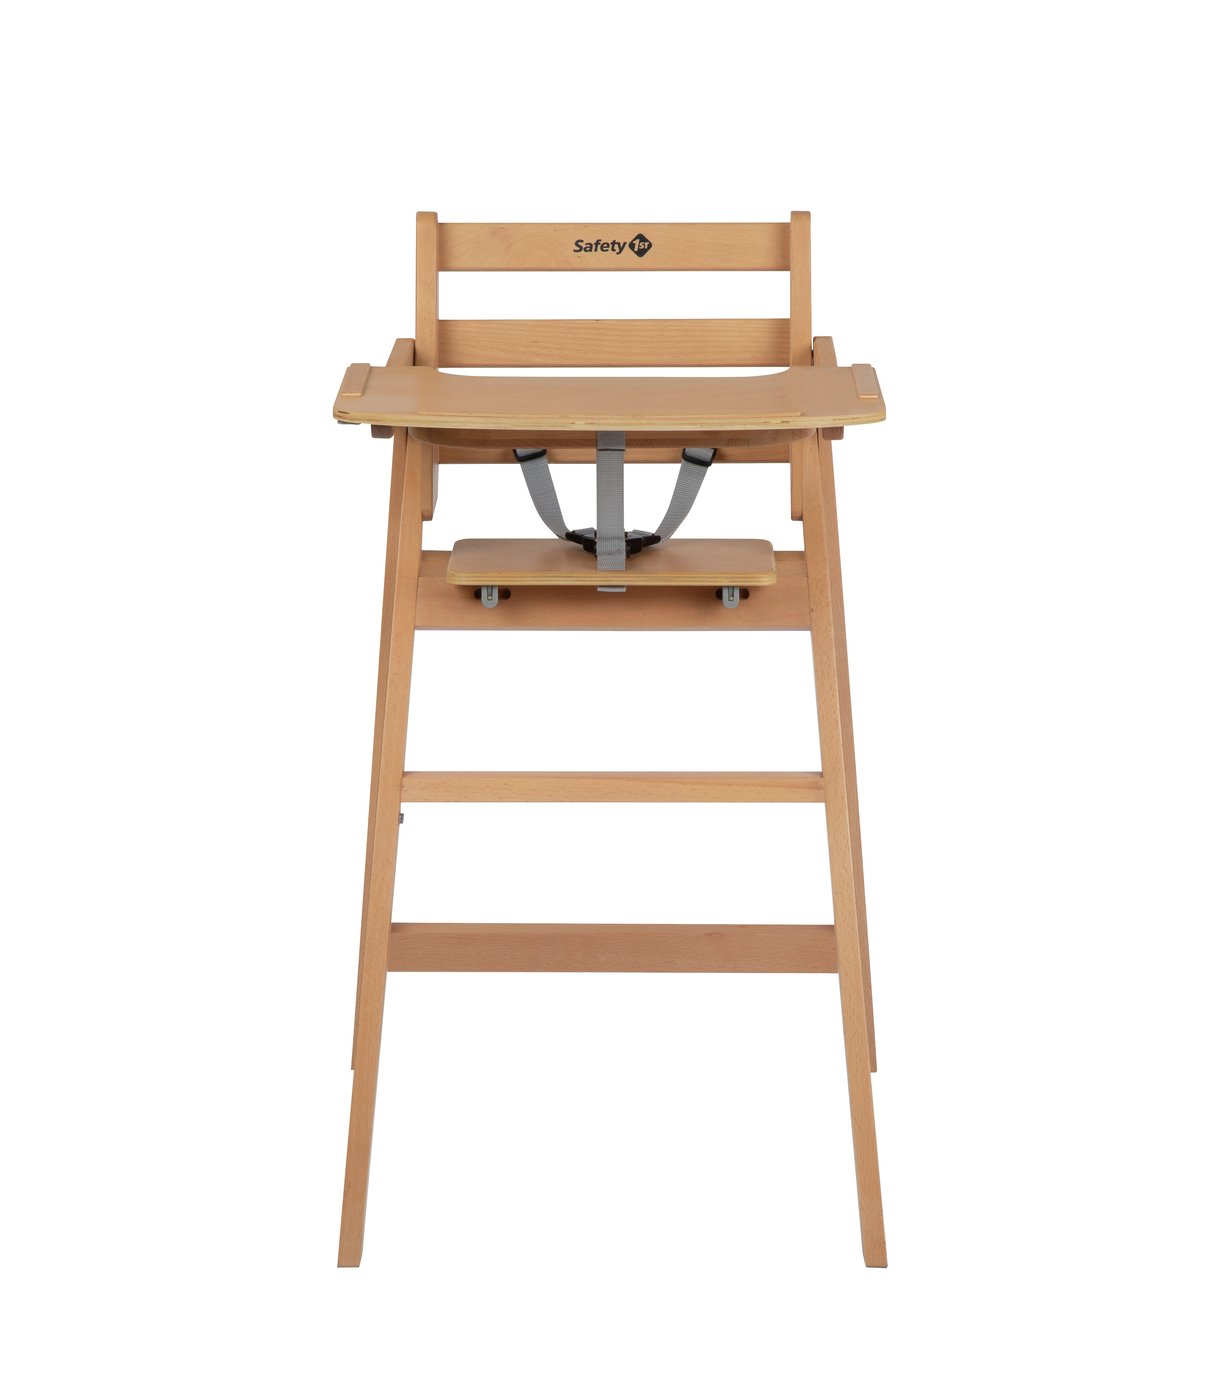 Safety 1st Nordik Wooden Highchair Review